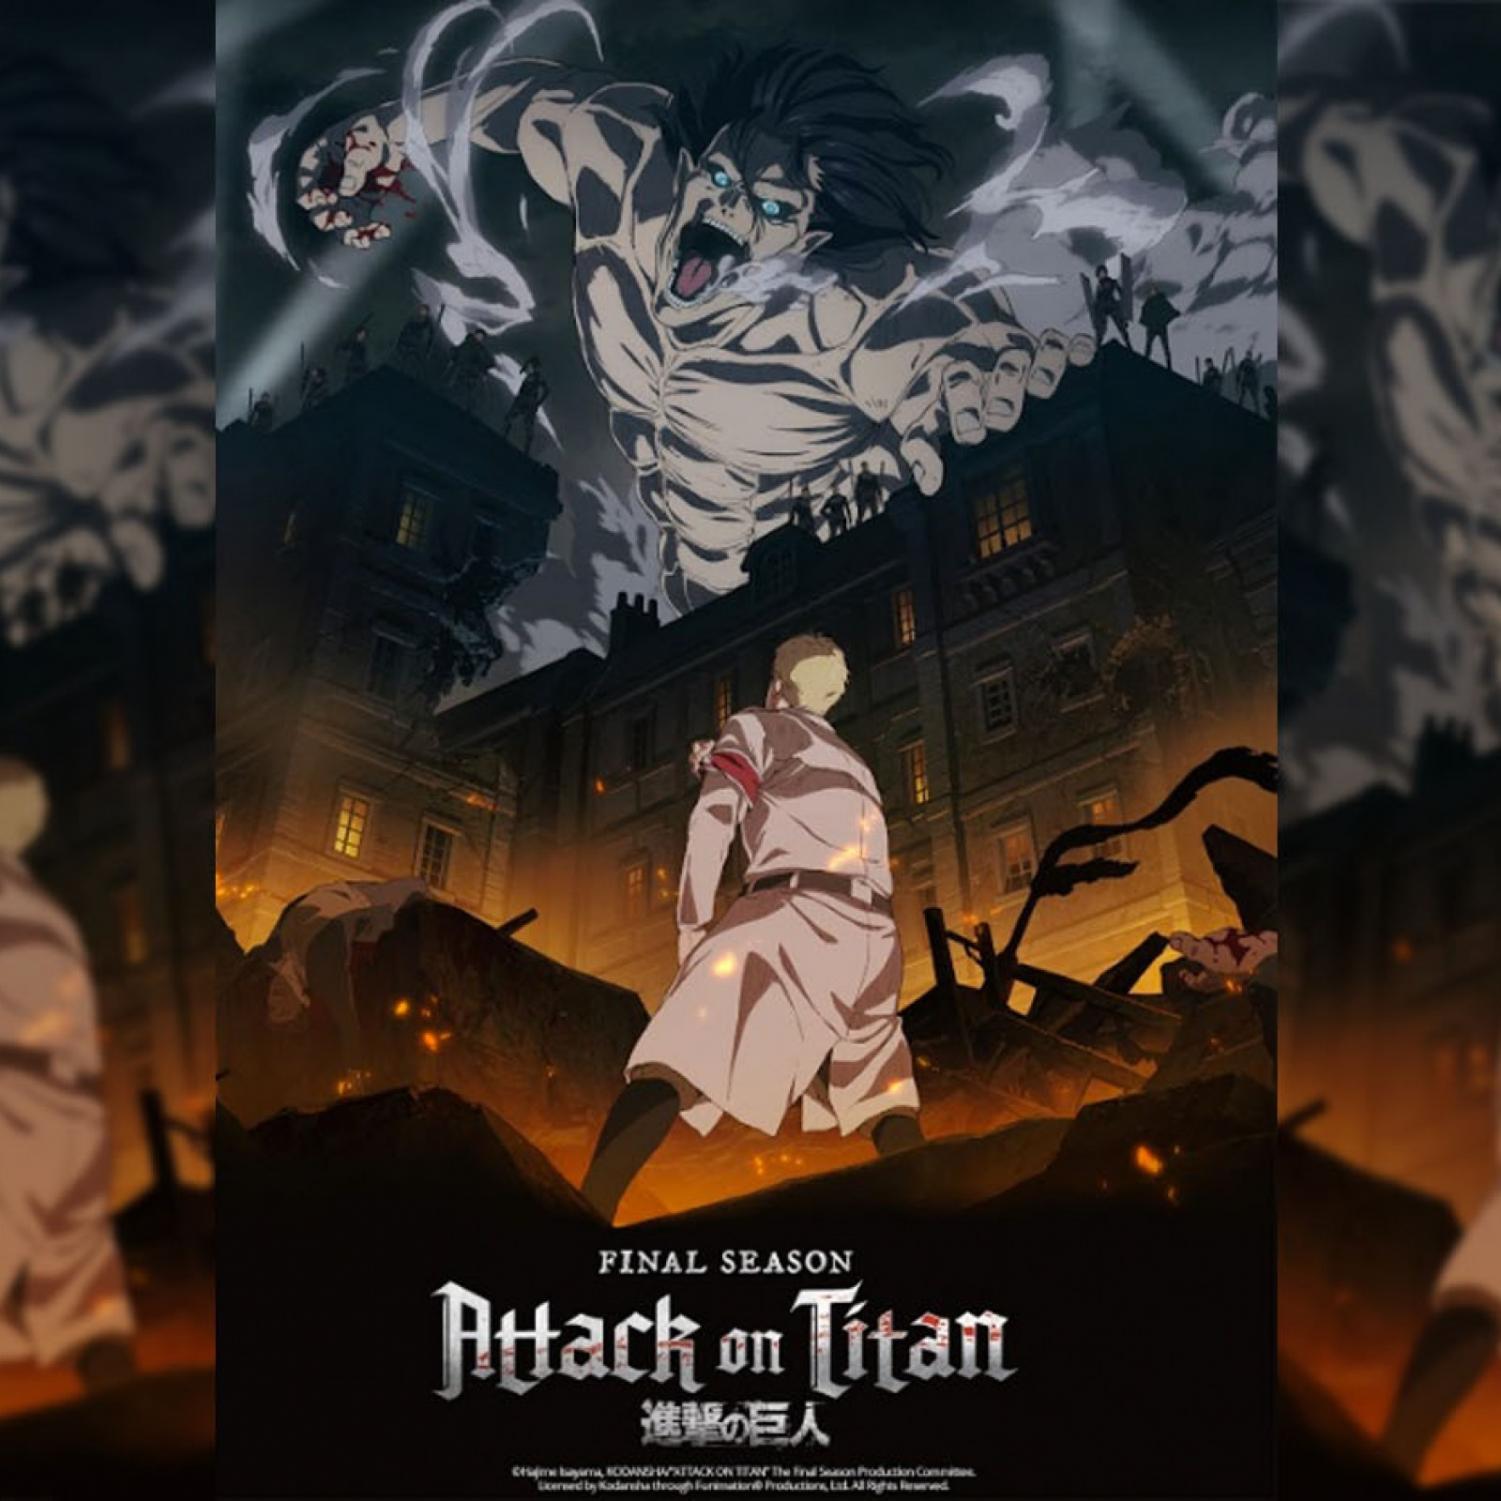 Attack on Titan soundtrack: Who sings the main theme of season 4 part 3?